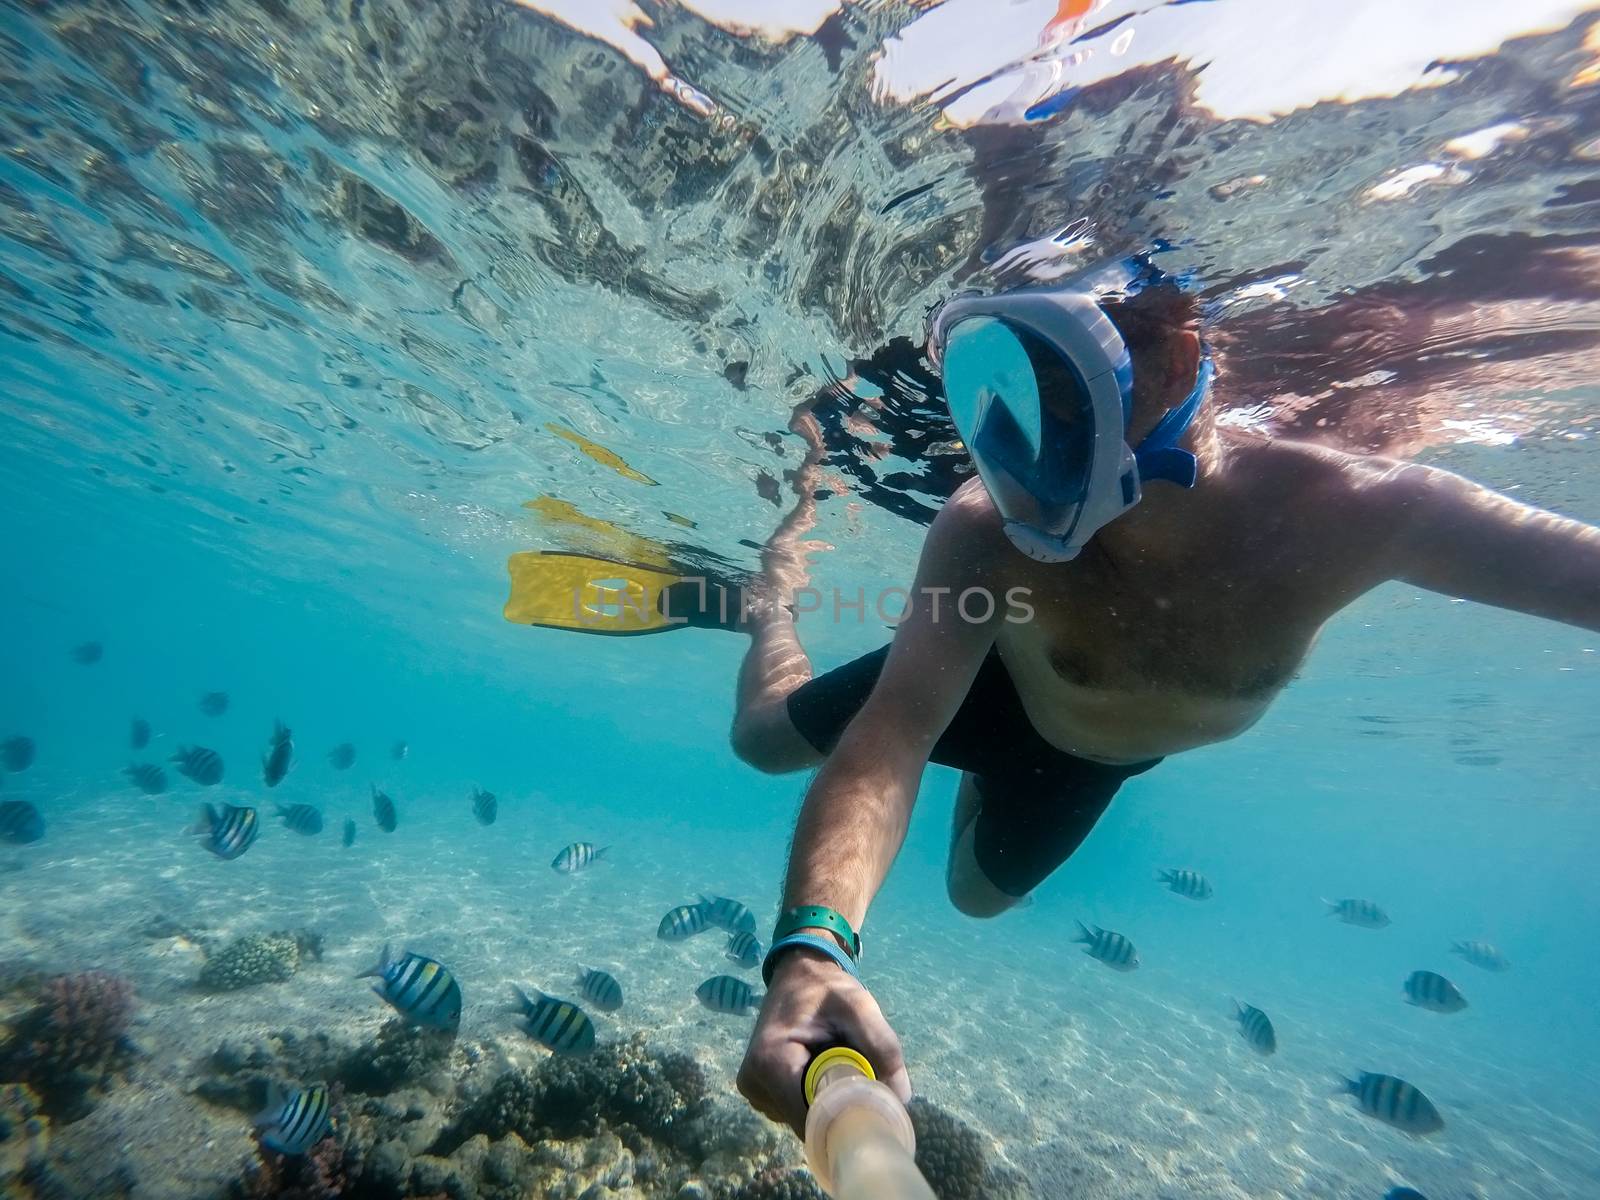 Snorkel swim in shallow water with coral fish, Red Sea, Egypt by artush